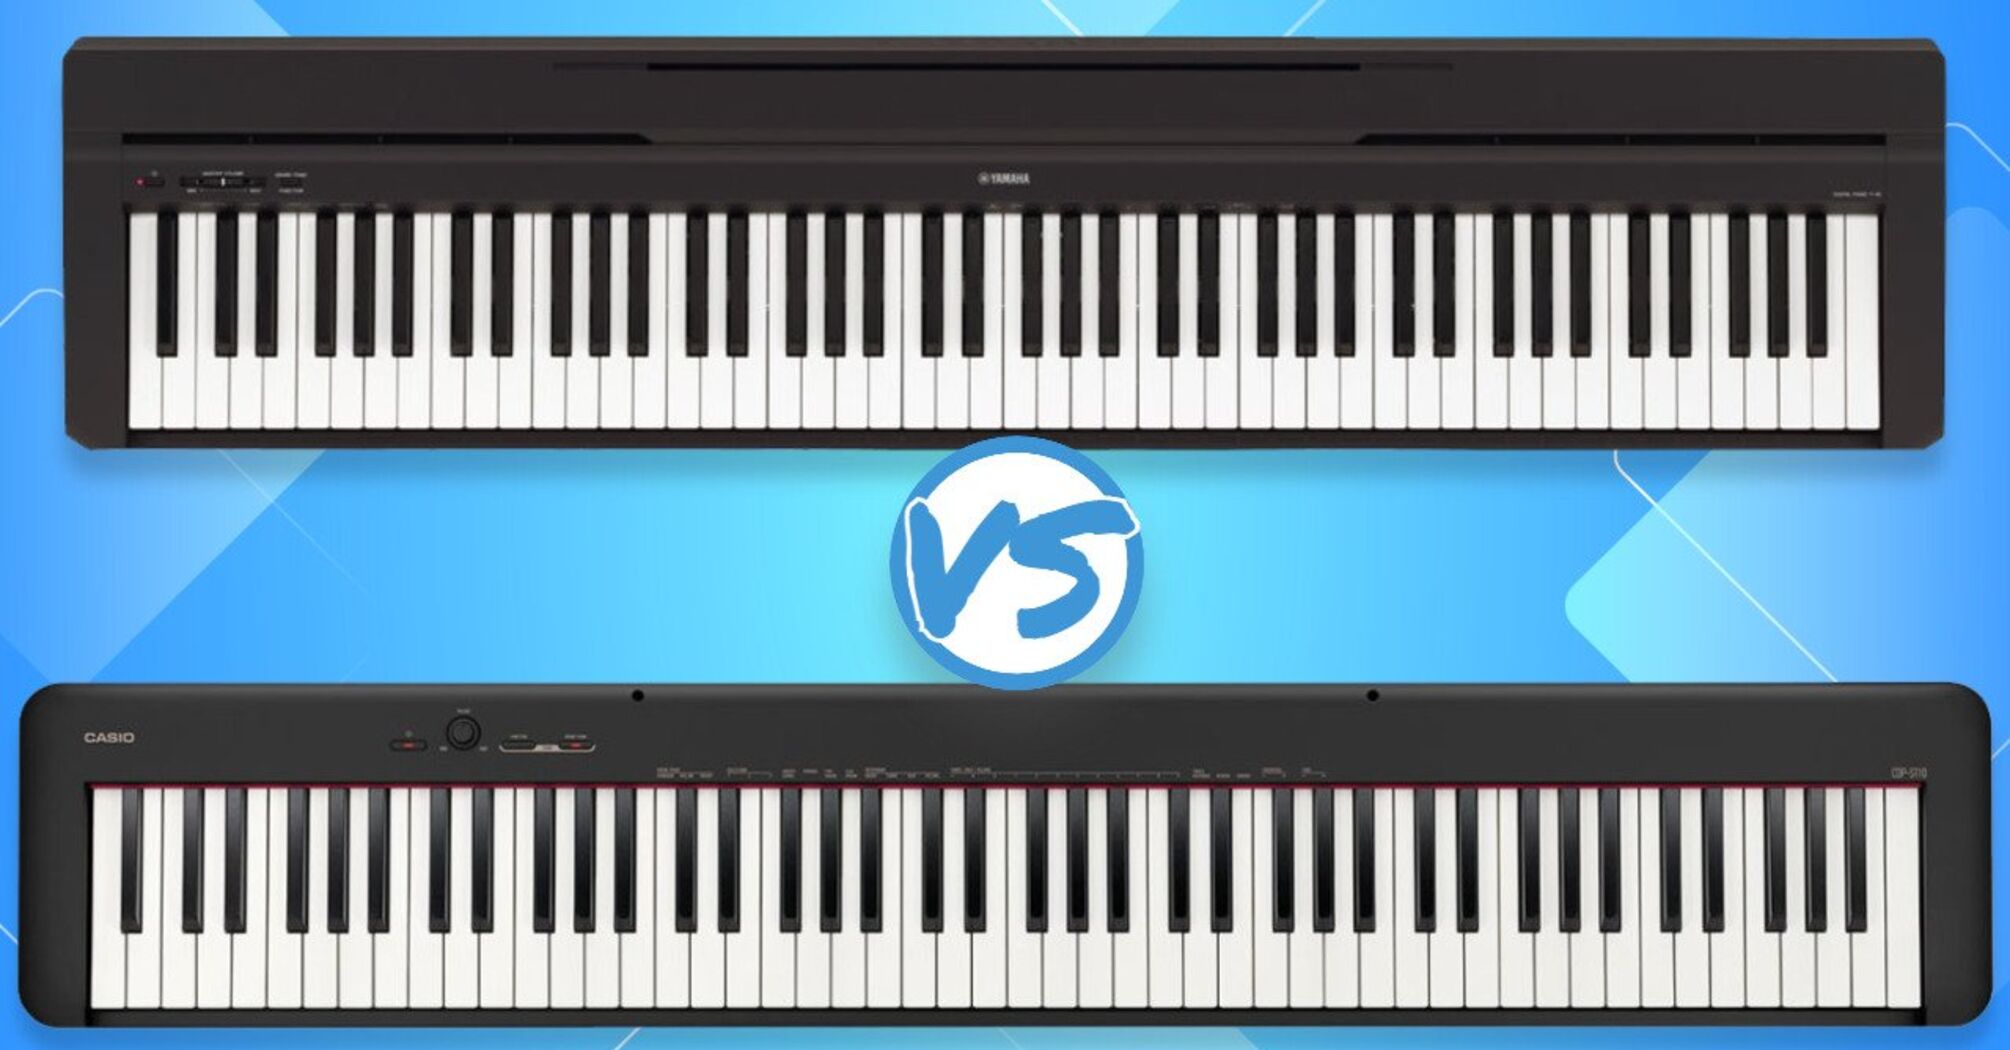 Comparison of Yamaha and Casio synthesizers